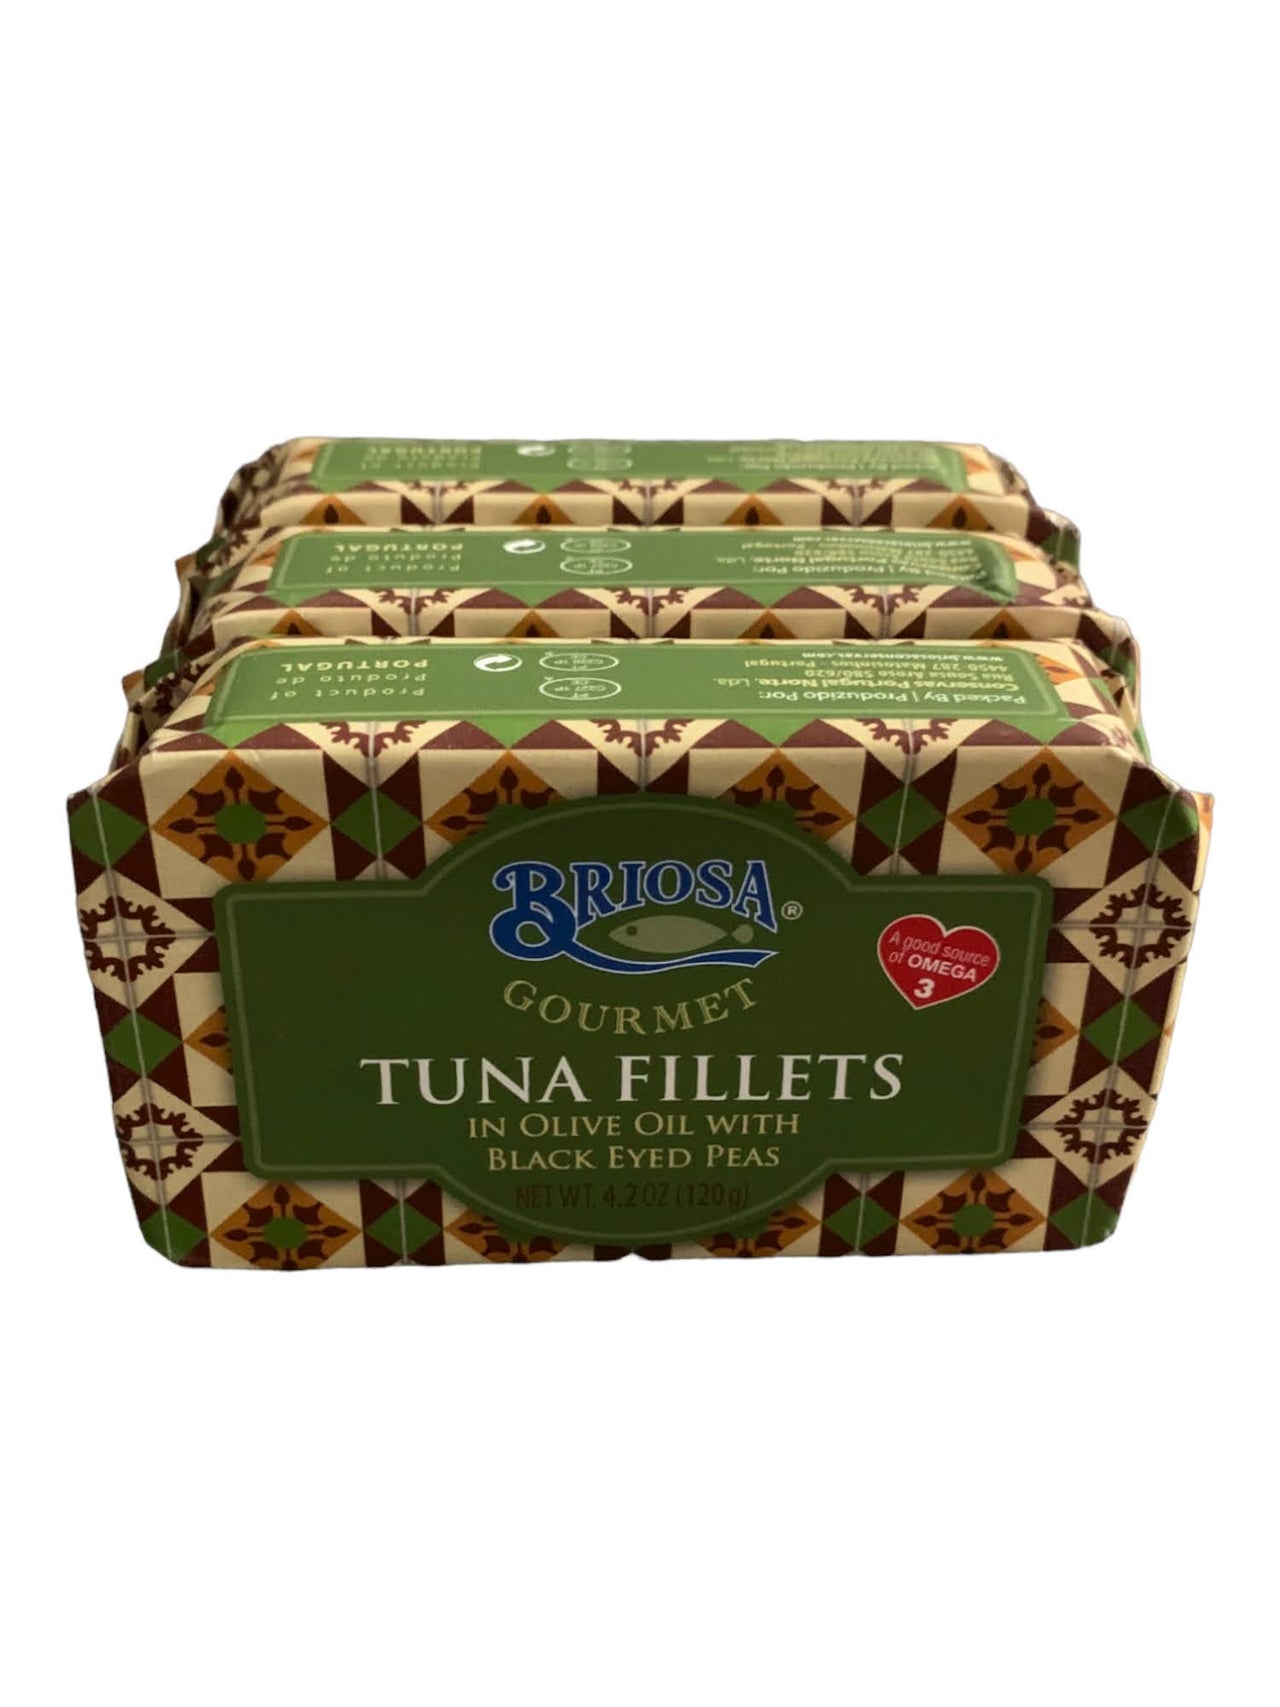 Briosa Gourmet Tuna Fillets in Olive Oil with Black Eyed Peas - 3 Pack